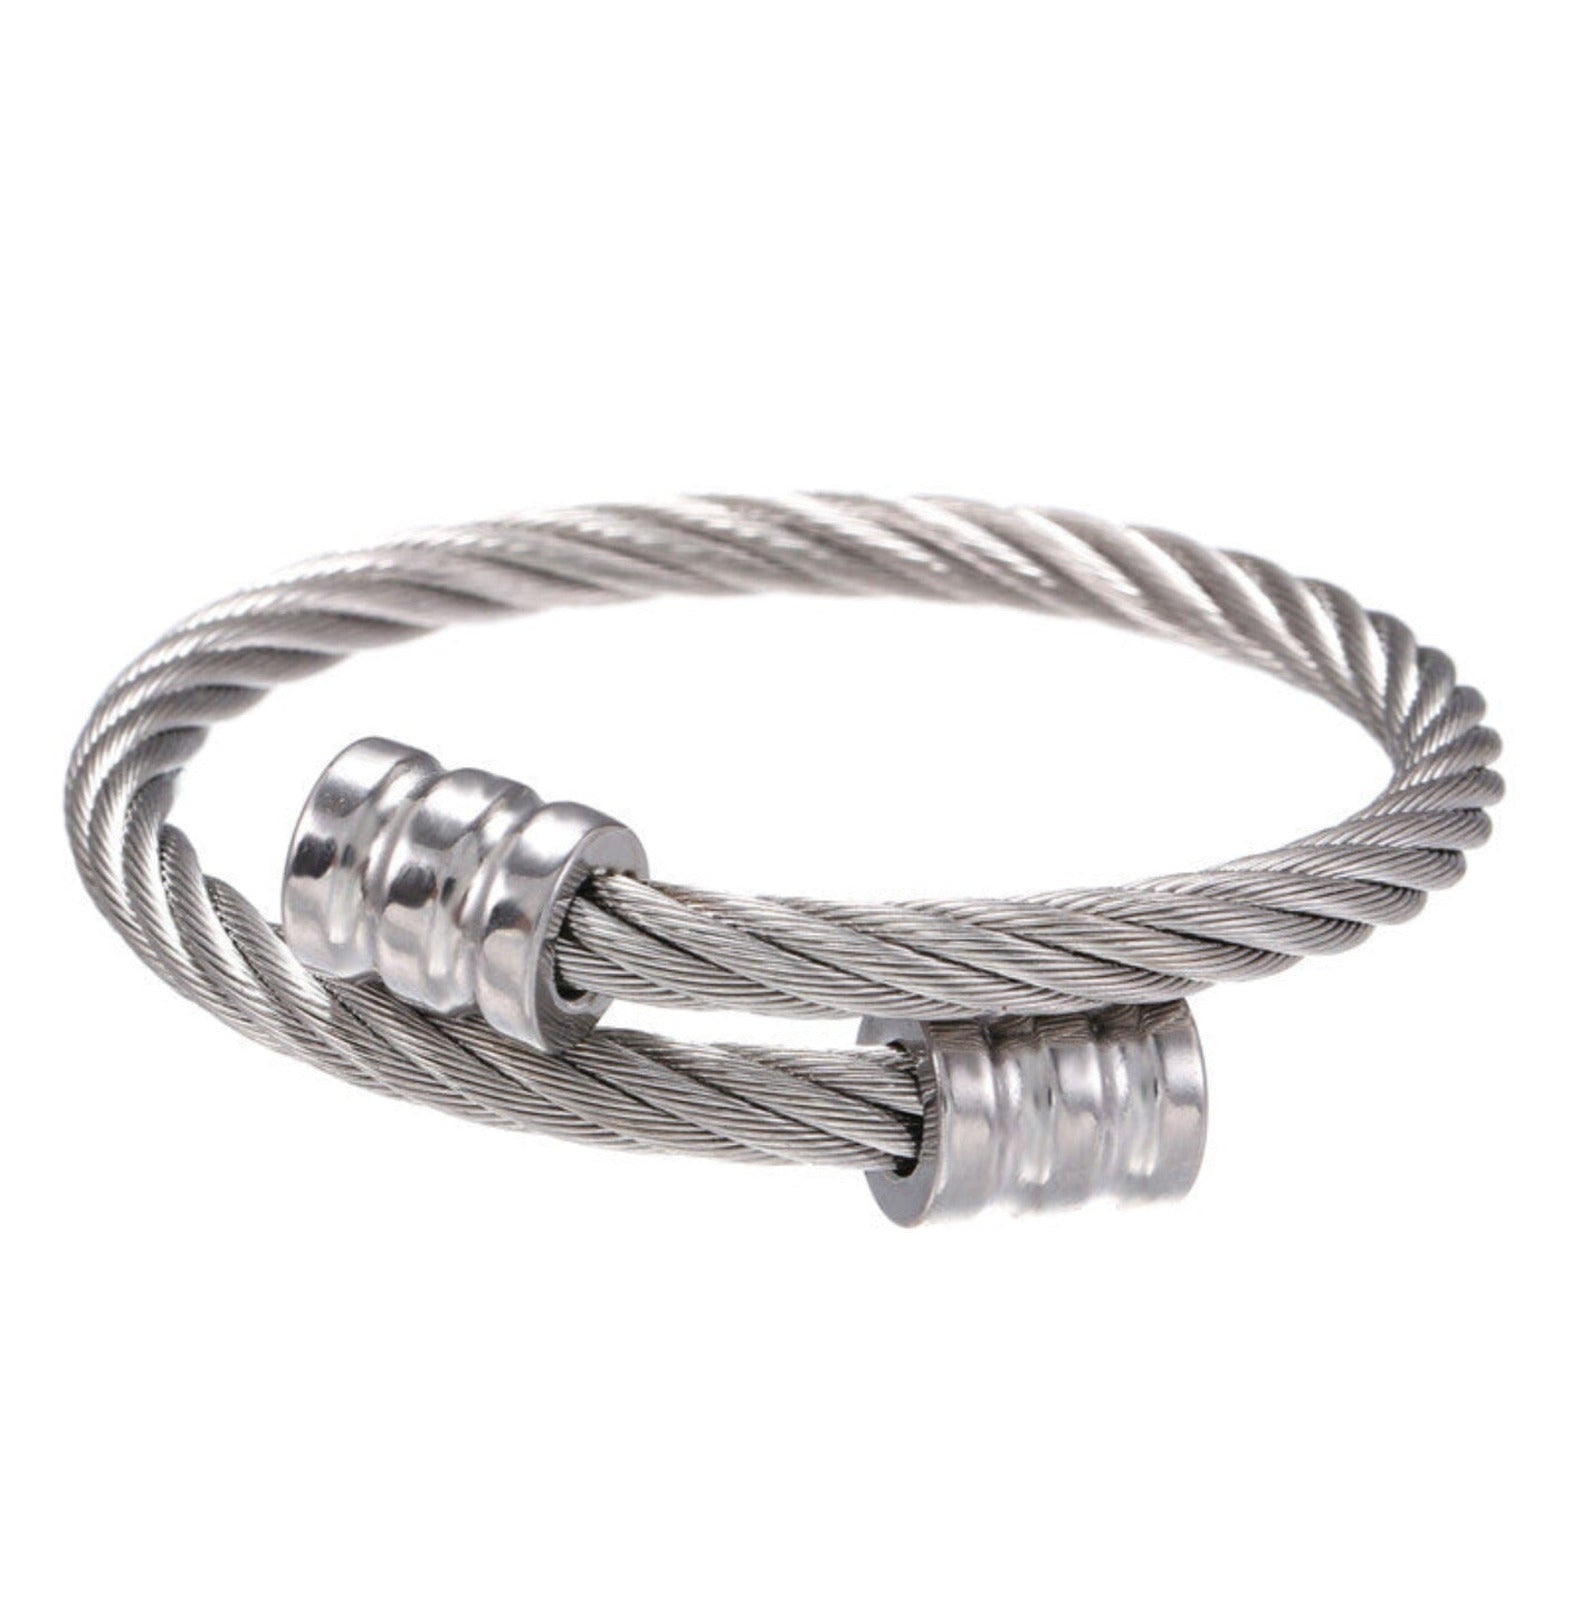 TWISTER BANGLE BRACELET - SILVER ring Yubama Jewelry Online Store - The Elegant Designs of Gold and Silver ! Silver 